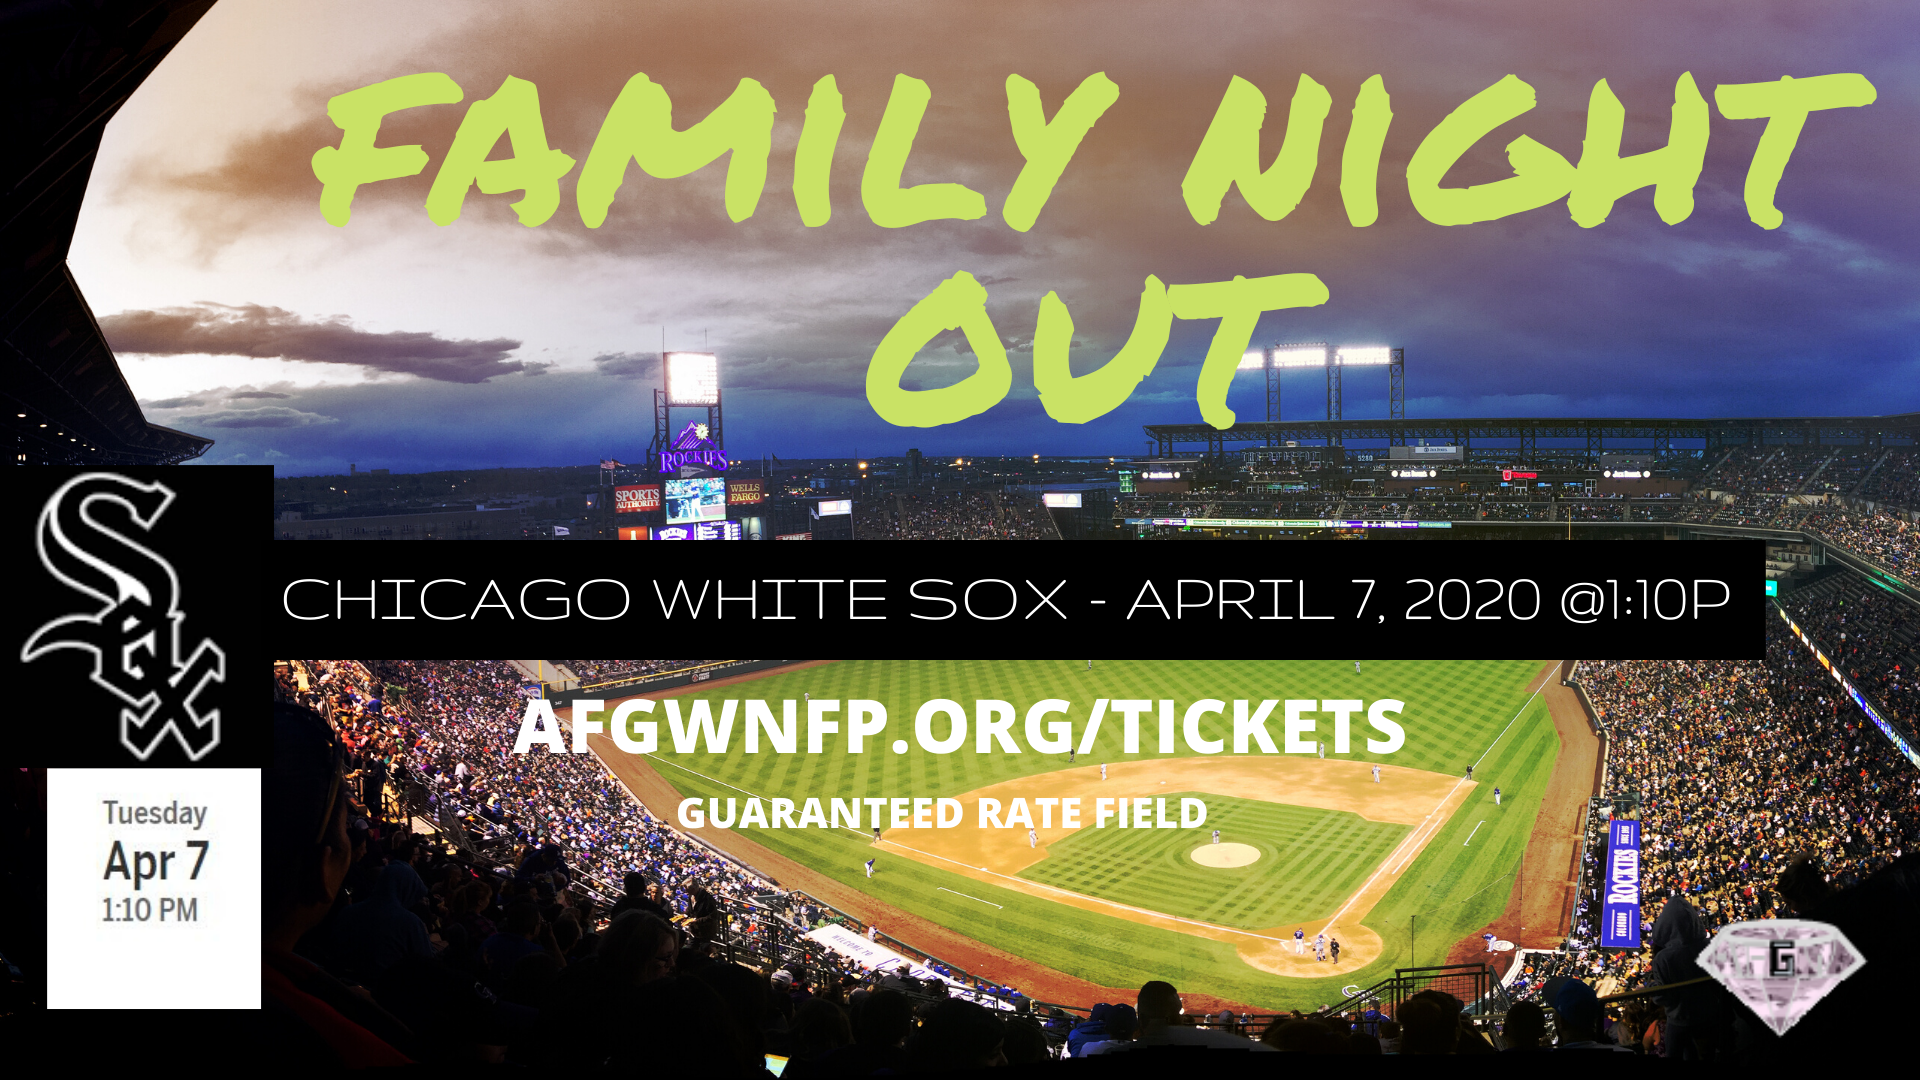 A Few Great Women - Chicago White Sox Family Night Out